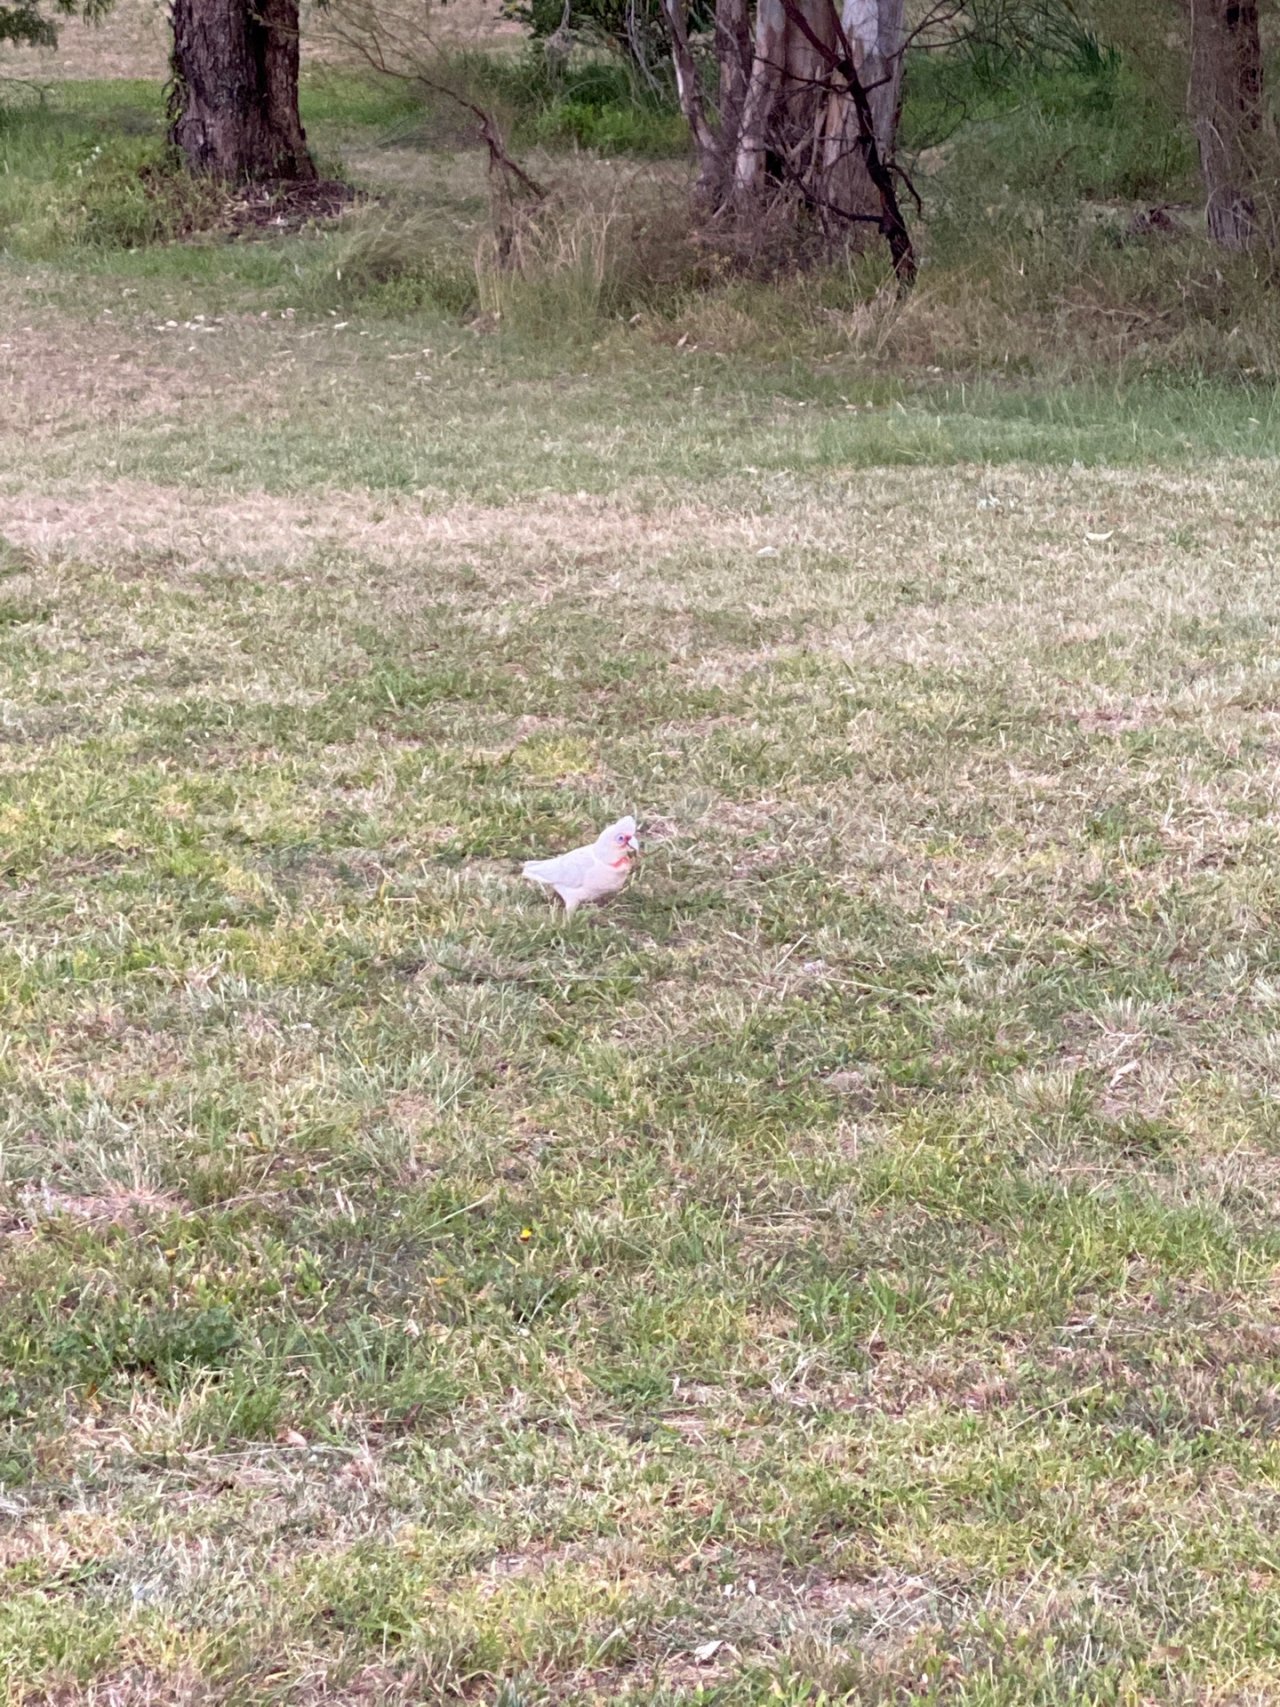 Long-billed Corella in Big City Birds App spotted by Sara Baillie on 12.12.2020